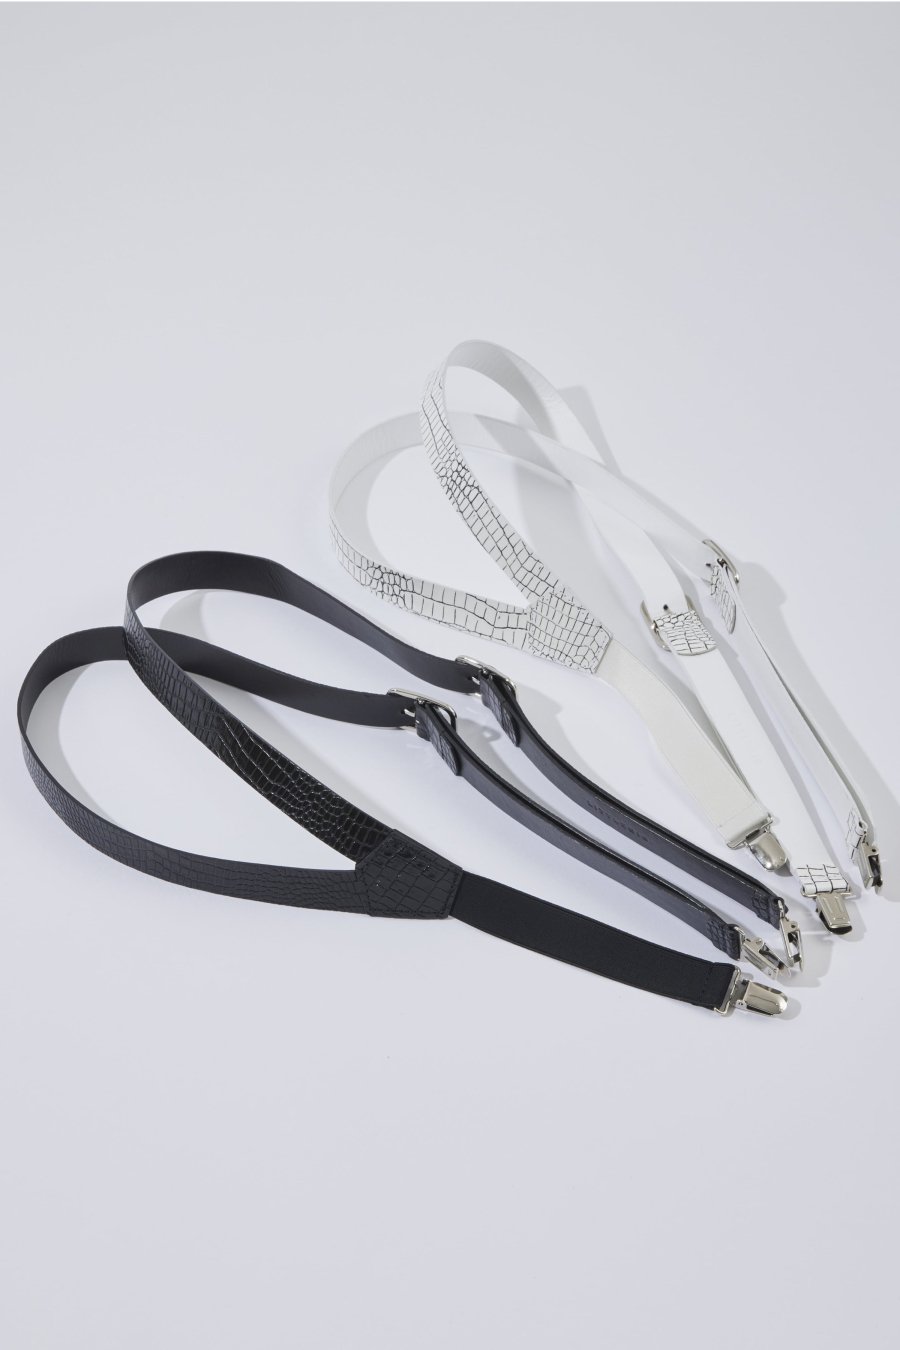 LITTLEBIG  Crocodile Suspenders(Black or White)<img class='new_mark_img2' src='https://img.shop-pro.jp/img/new/icons15.gif' style='border:none;display:inline;margin:0px;padding:0px;width:auto;' />